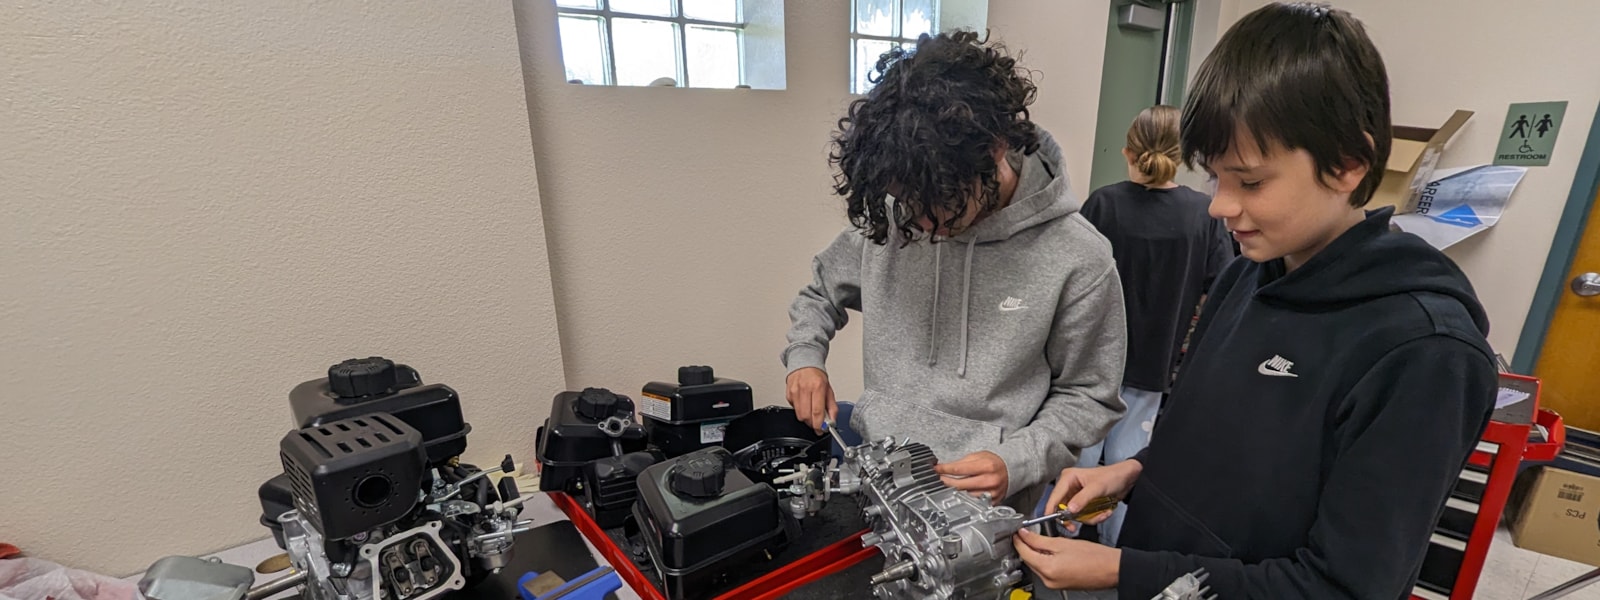 Two students working on a four stroke engine